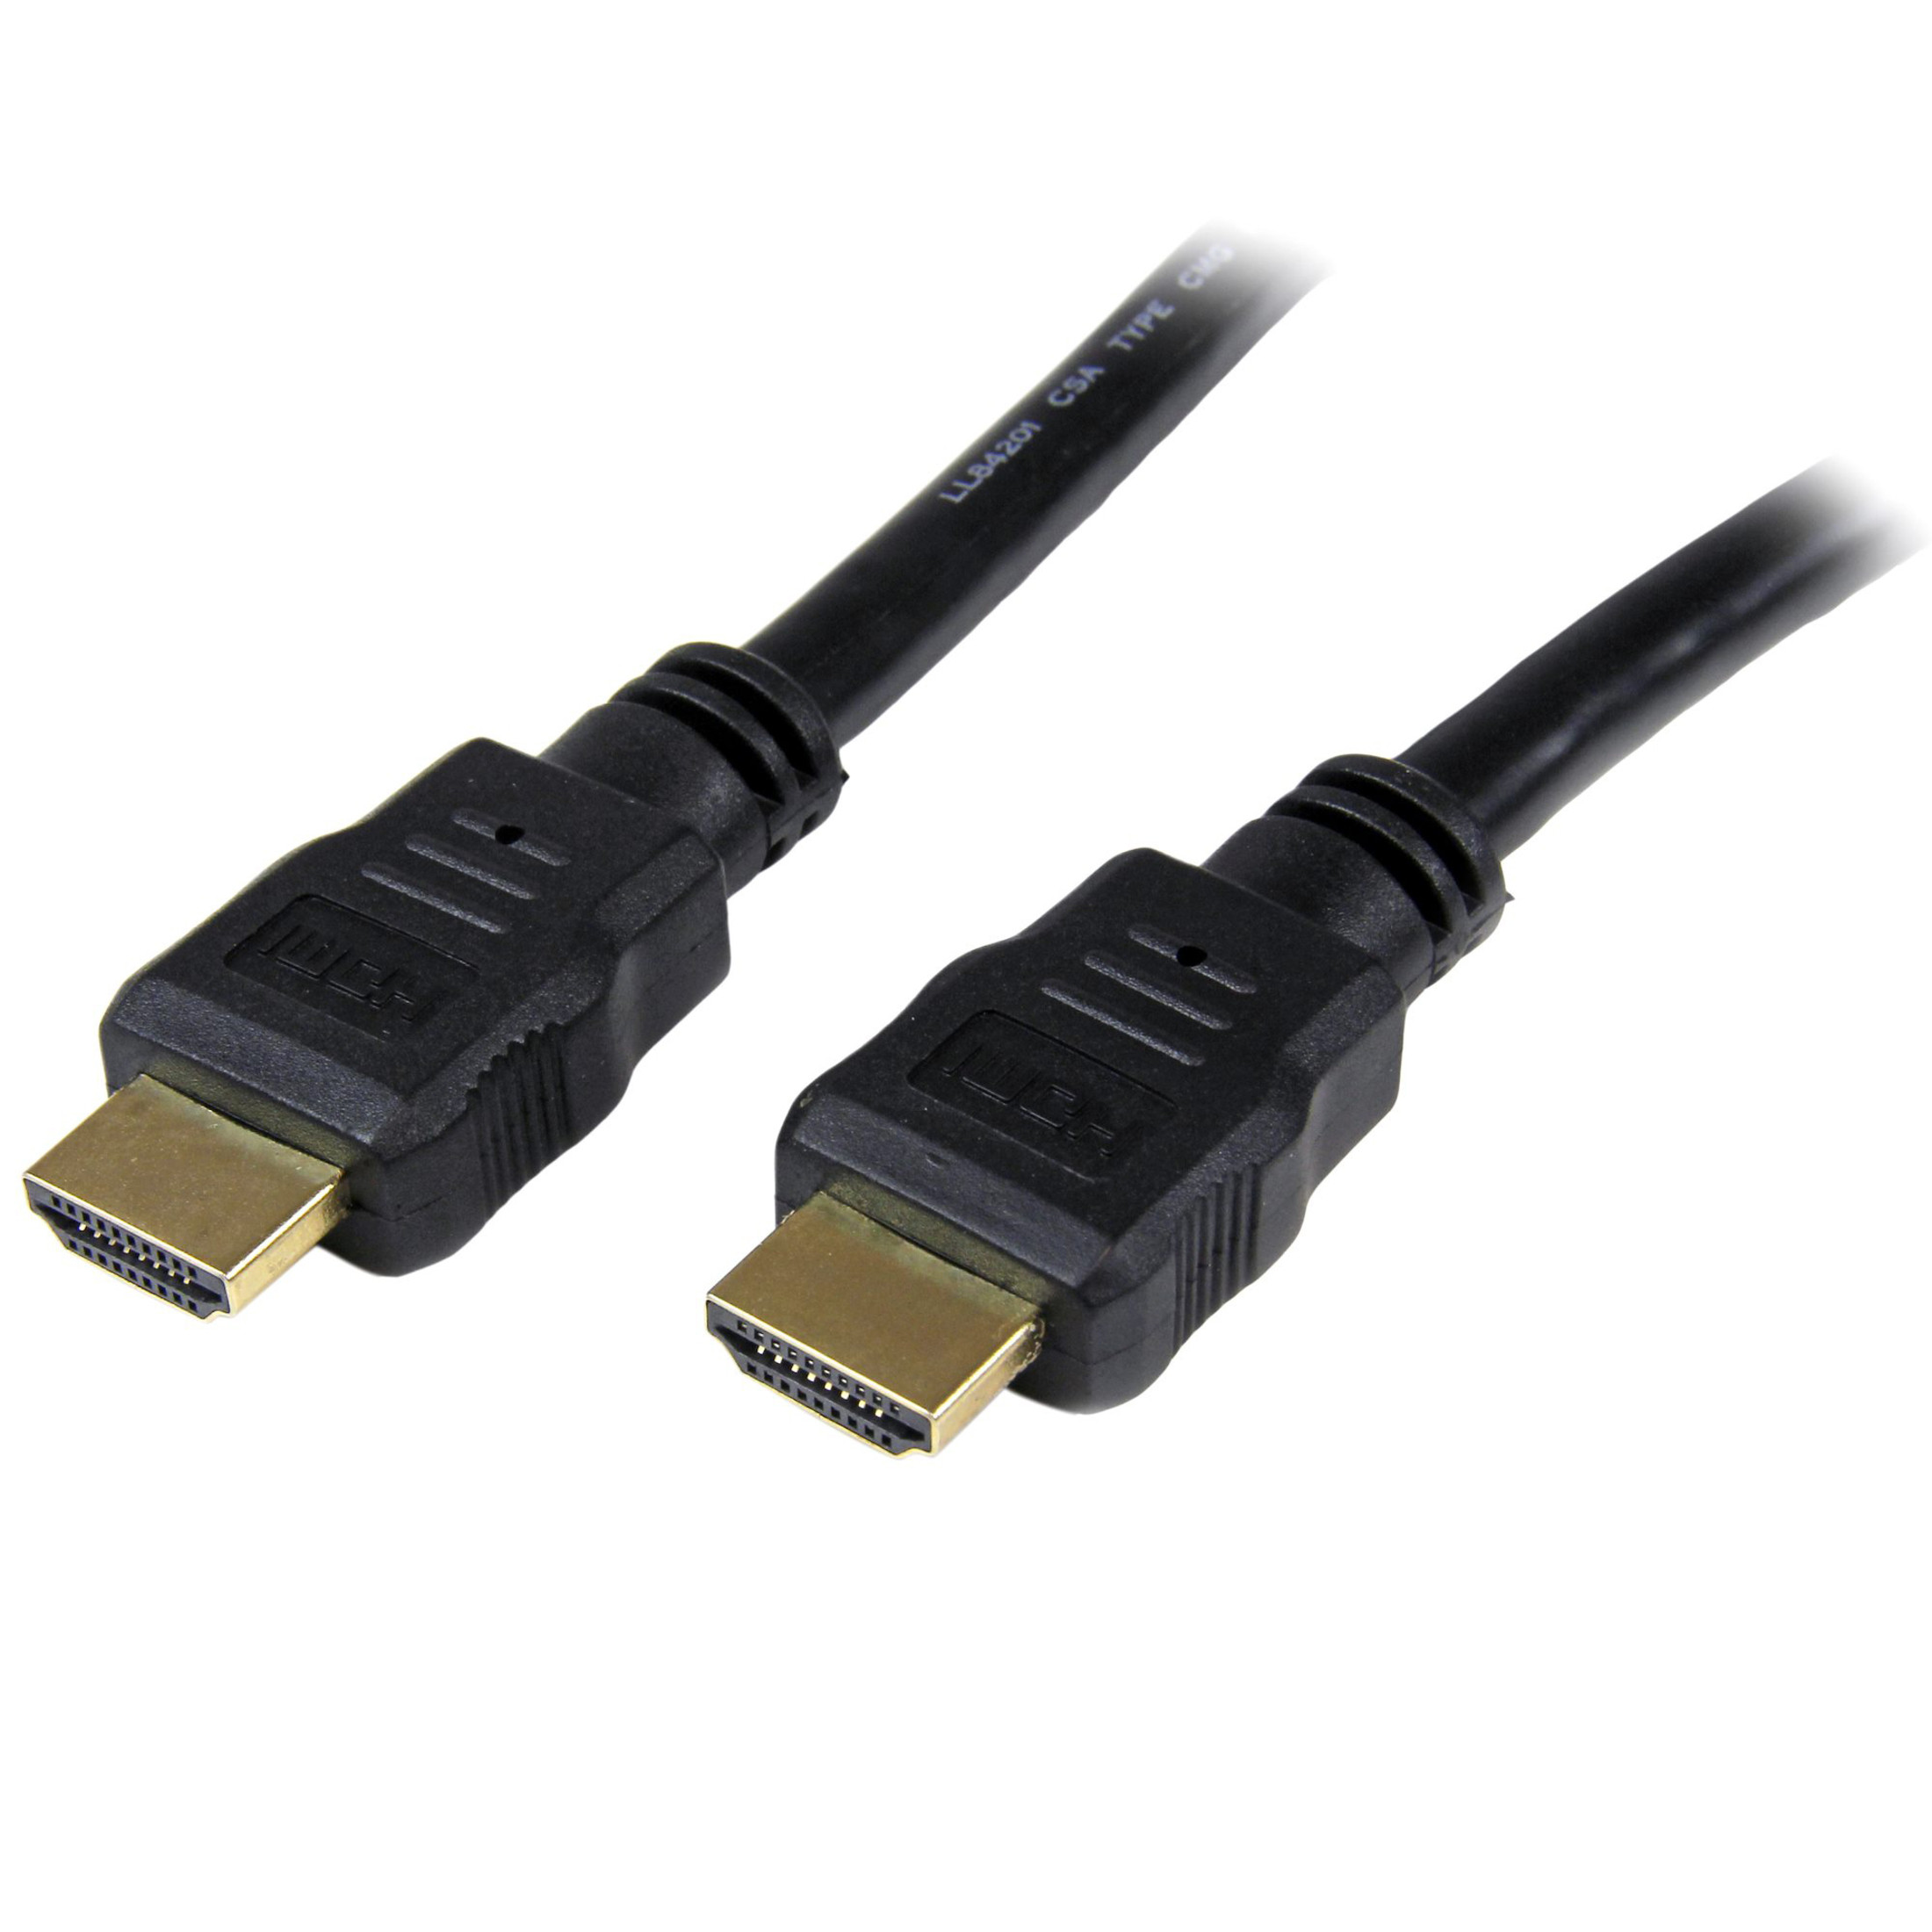 Startech .com 10ft/3m HDMI Cable, 4K High Speed HDMI Cable with Ethernet,  Ultra HD 4K 30Hz Video, HDMI 1.4 Cable, HDMI Monitor Cord, Black9.8ft